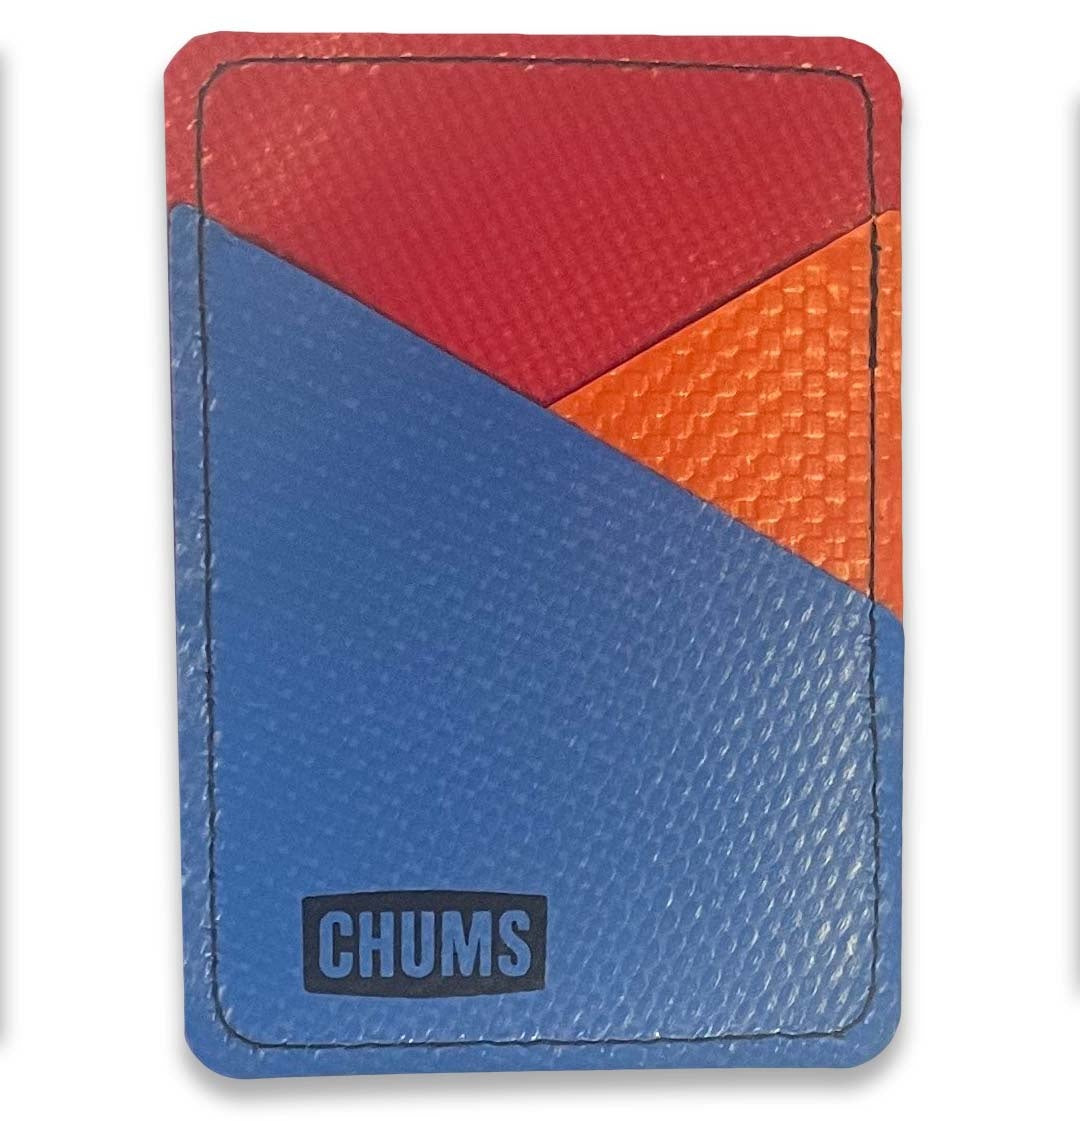 Chums - Duckie Wallet